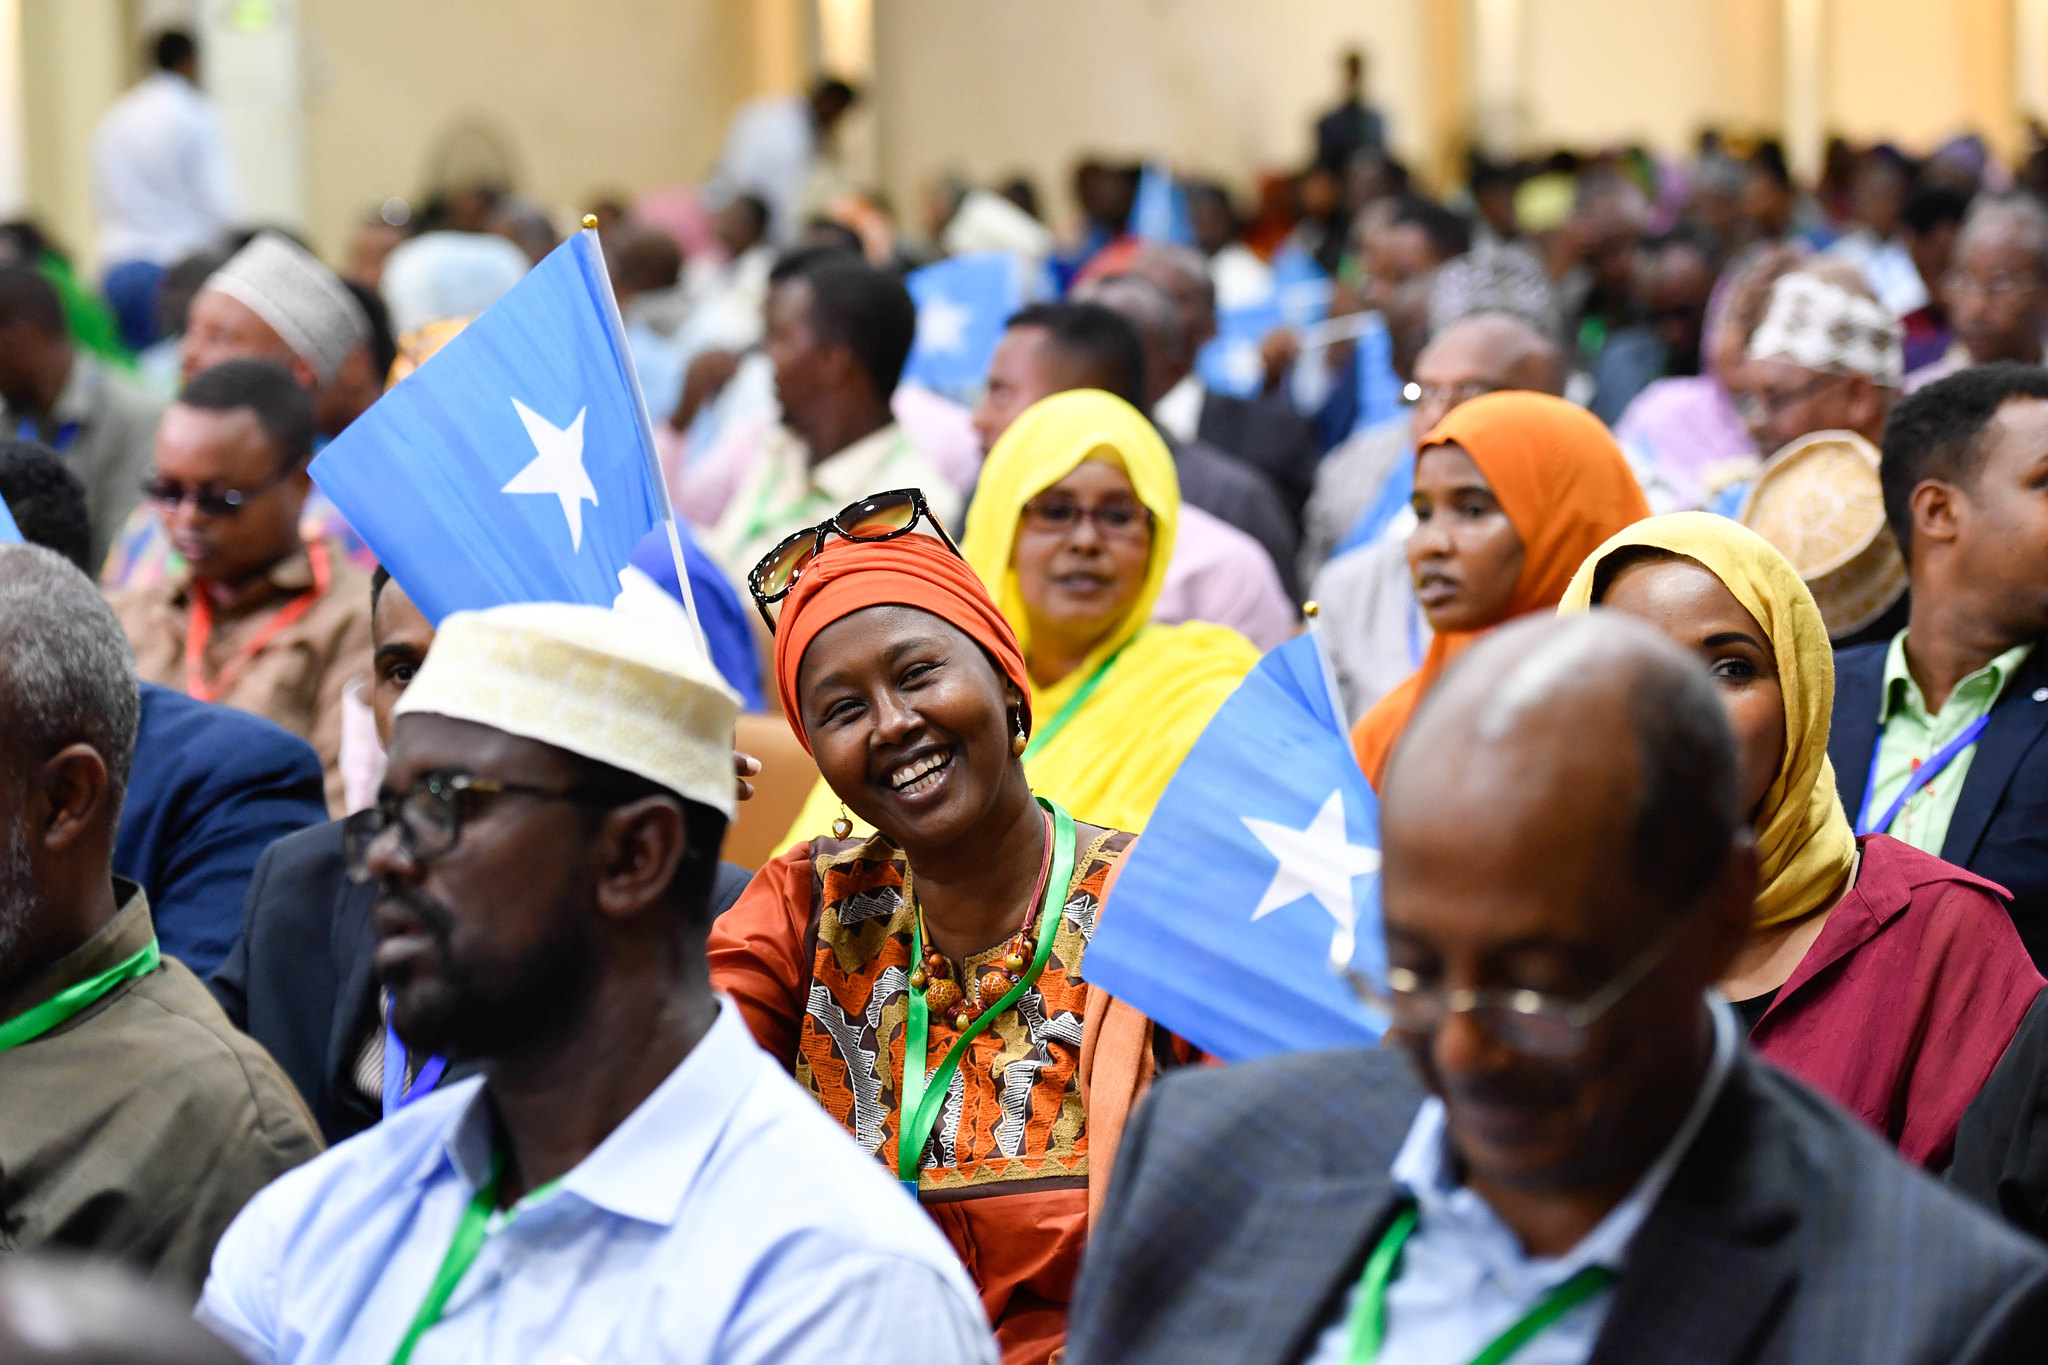 Senior  officials of the Federal Government of Somalia and Federal Member  States, UN representatives and members of civil society organizations at  the closing session of the national constitutional convention in  Mogadishu on 15 May 2018. UN Photo / Ilyas Ahmed.